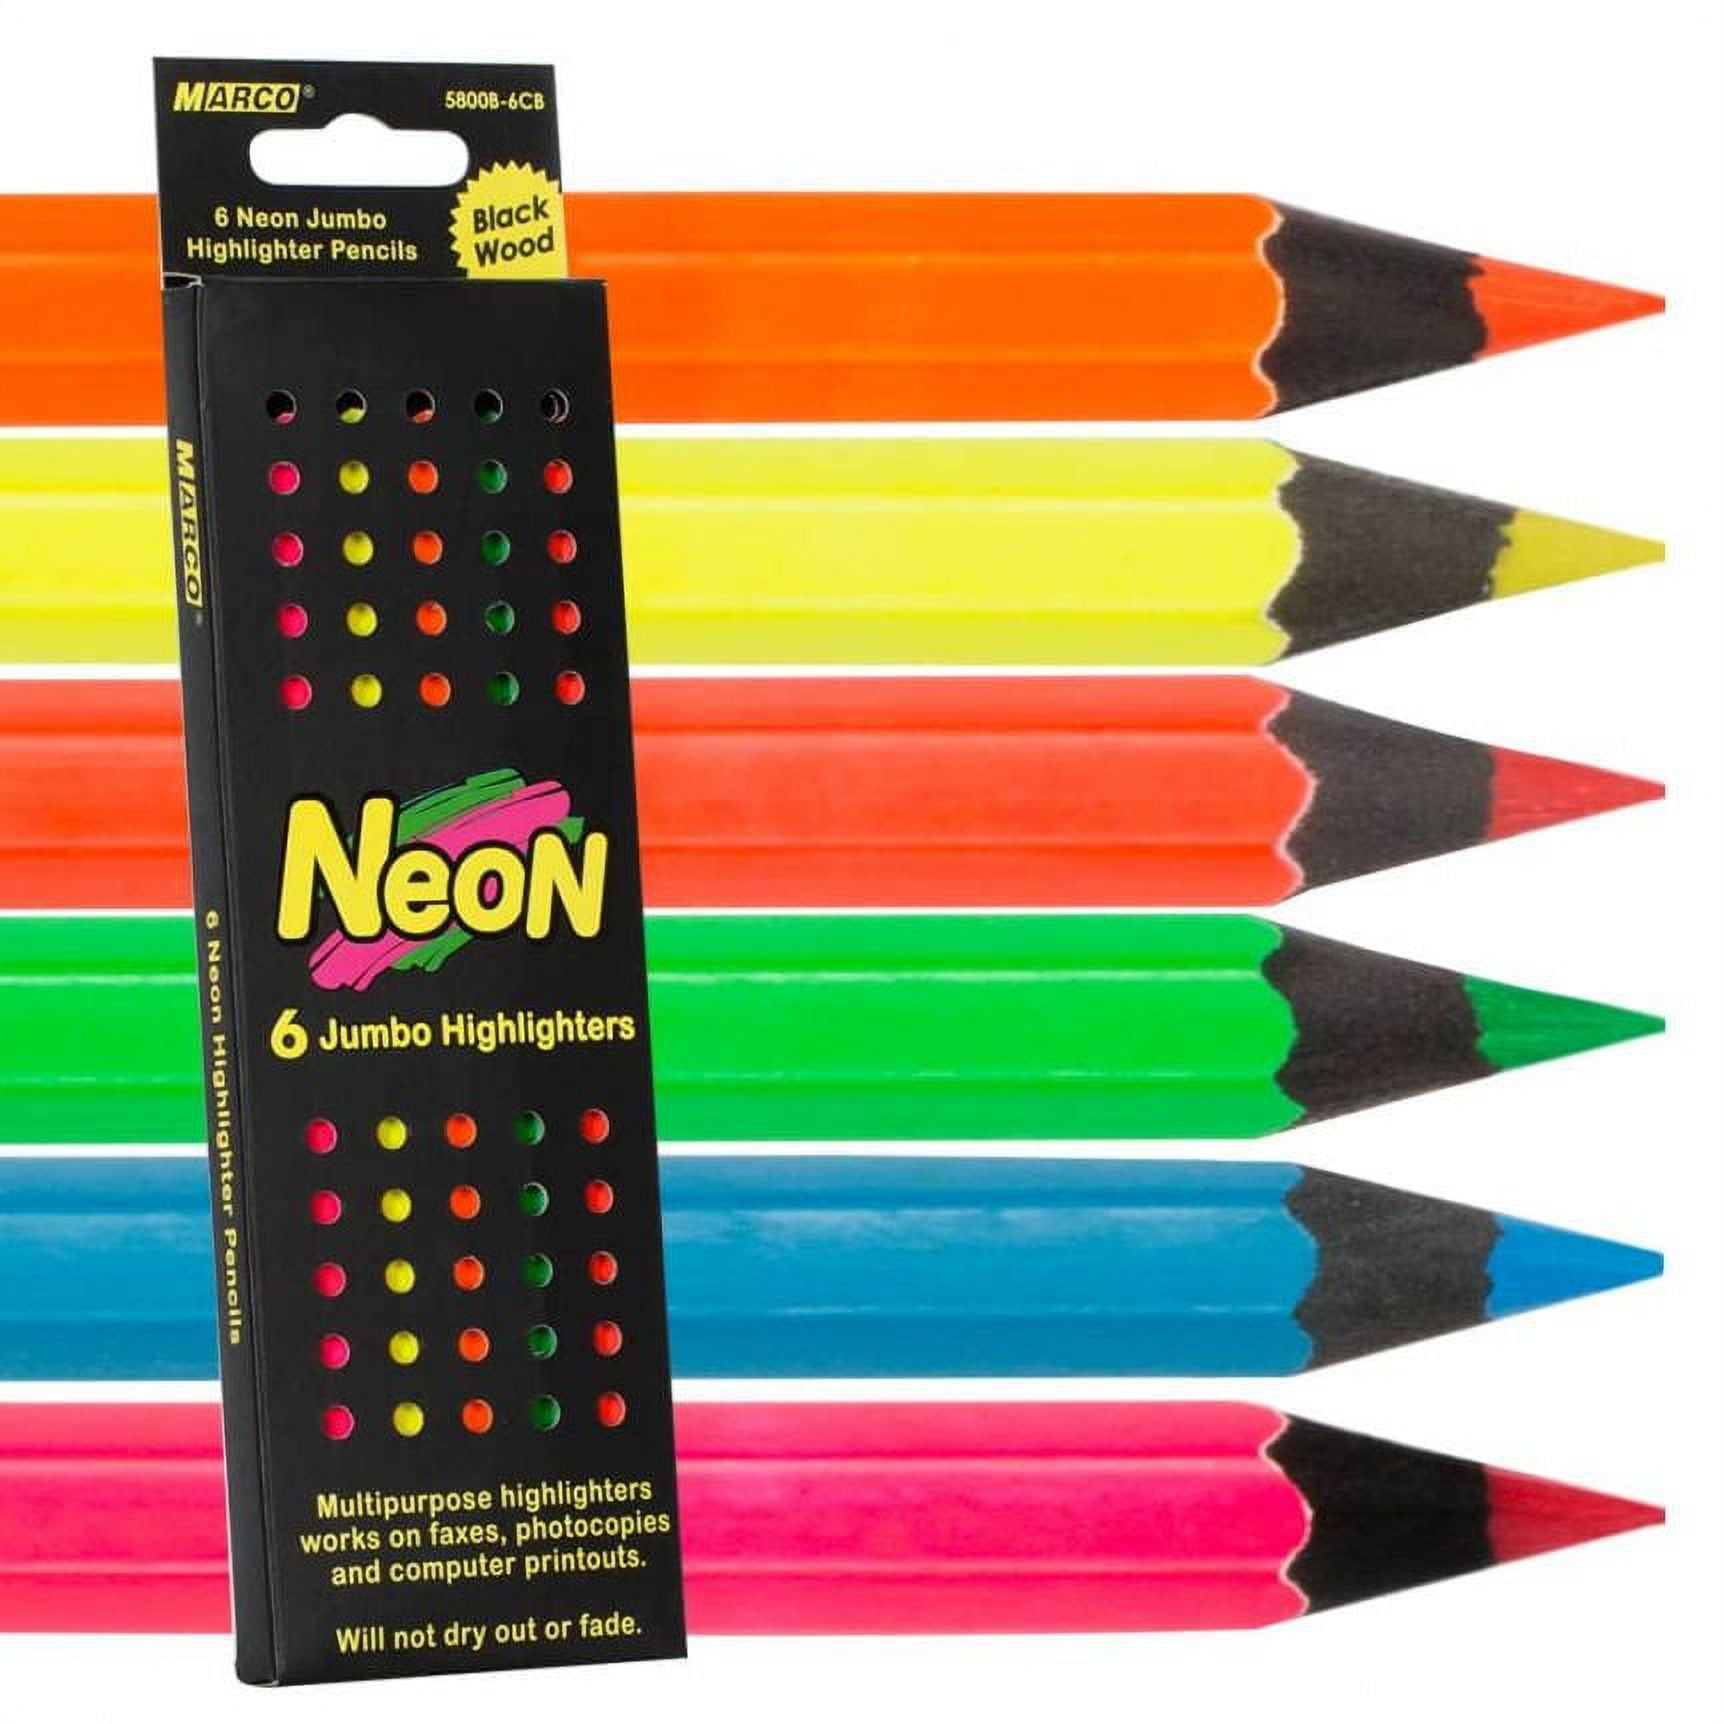 40 Pieces Glow Pencils Colorful Neon Wooden Pencils for Kids Neon Party  Favors Pencils Glow in the Dark Fun Pencils with Eraser Drawing Pencils for